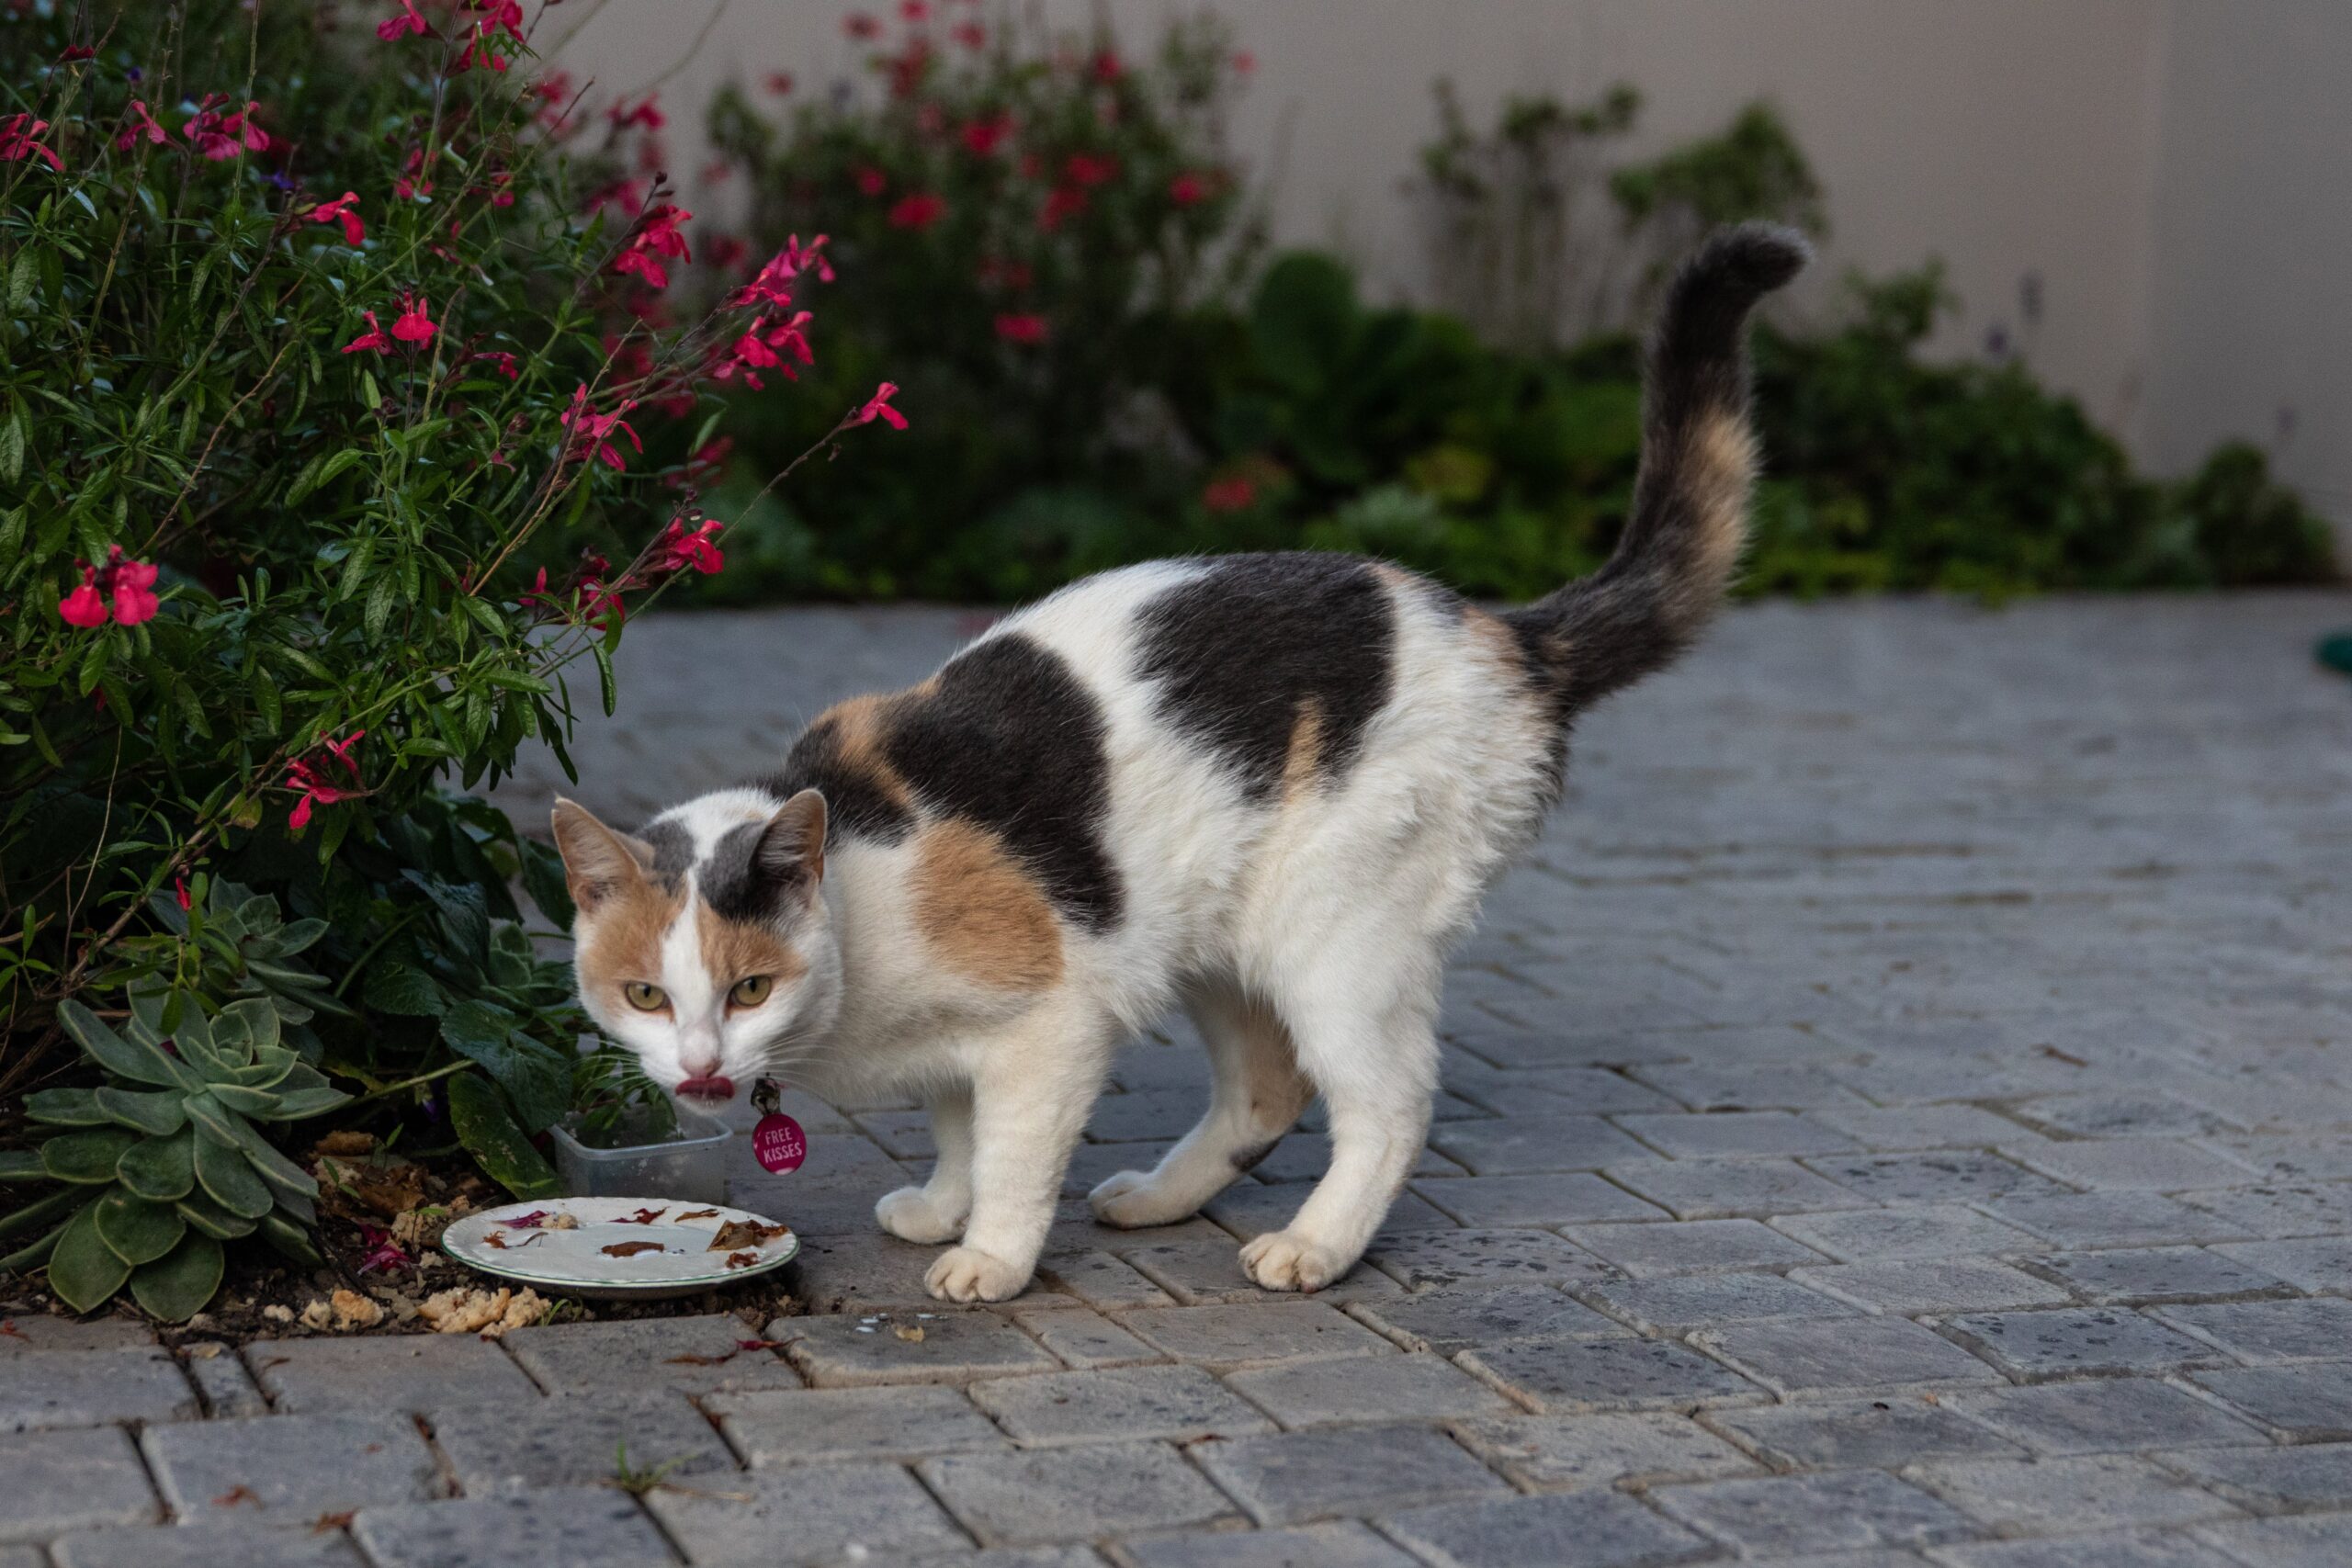 Black and white cat eating pork near some red flowers